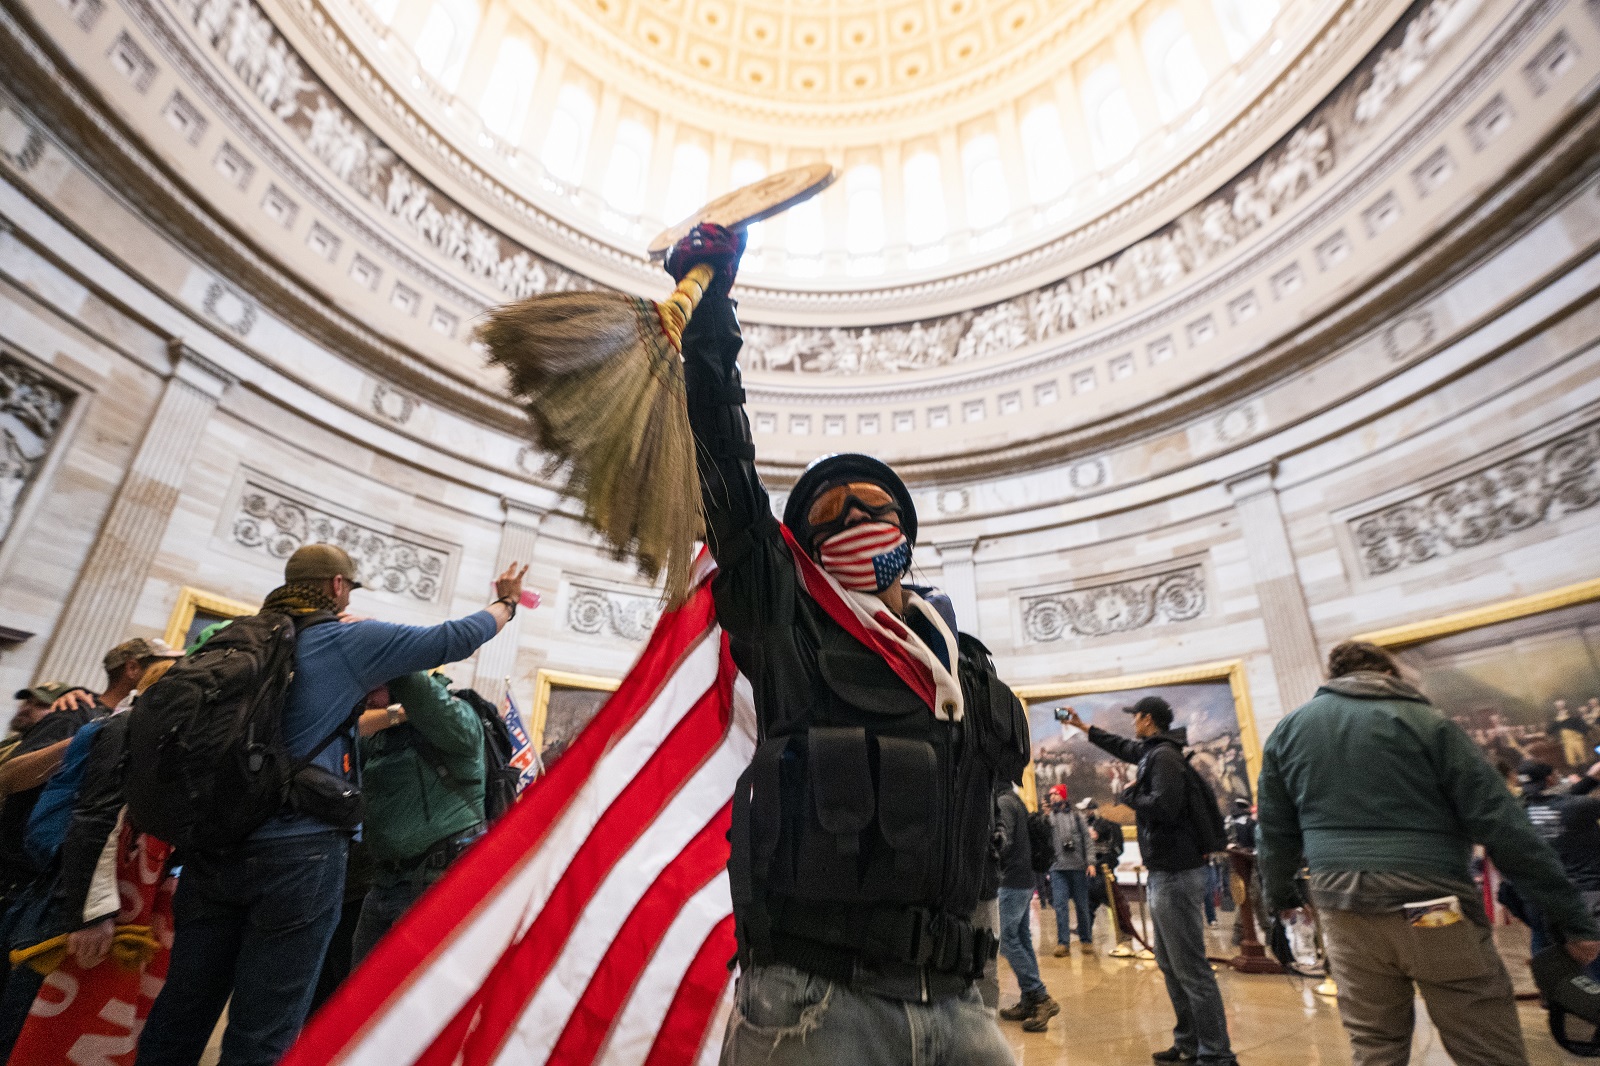 epa08926300 Supporters of US President Donald J. Trump and his baseless claims of voter fraud run through the Rotunda of the US Capitol after breaching Capitol security during their protest against Congress certifying Joe Biden as the next president in Washington, DC, USA, 06 January, 2020 (issued 08 January 2020). On 08 January Assistant House Speaker Katherine Clarke said the House will move to impeach President Trump if the Vice President and Cabinet do not remove him on their own.  EPA/JIM LO SCALZO